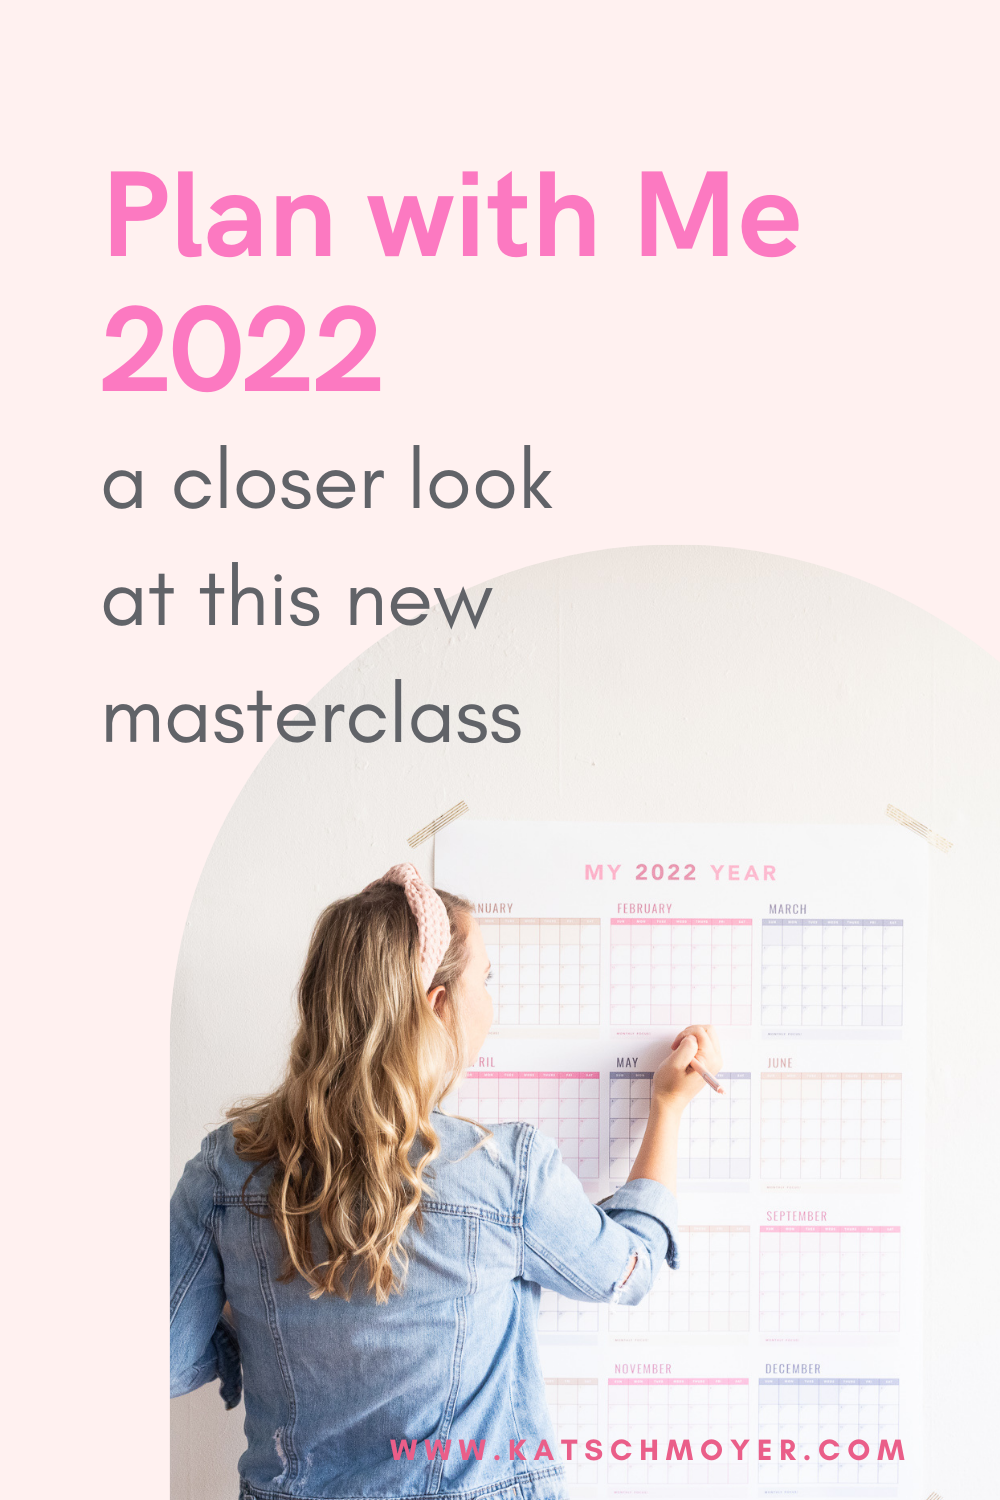 Plan 2022 With Me: New in the Kat Schmoyer Shop, an exclusive masterclass to help you strategically plan 2022 with confidence for your business